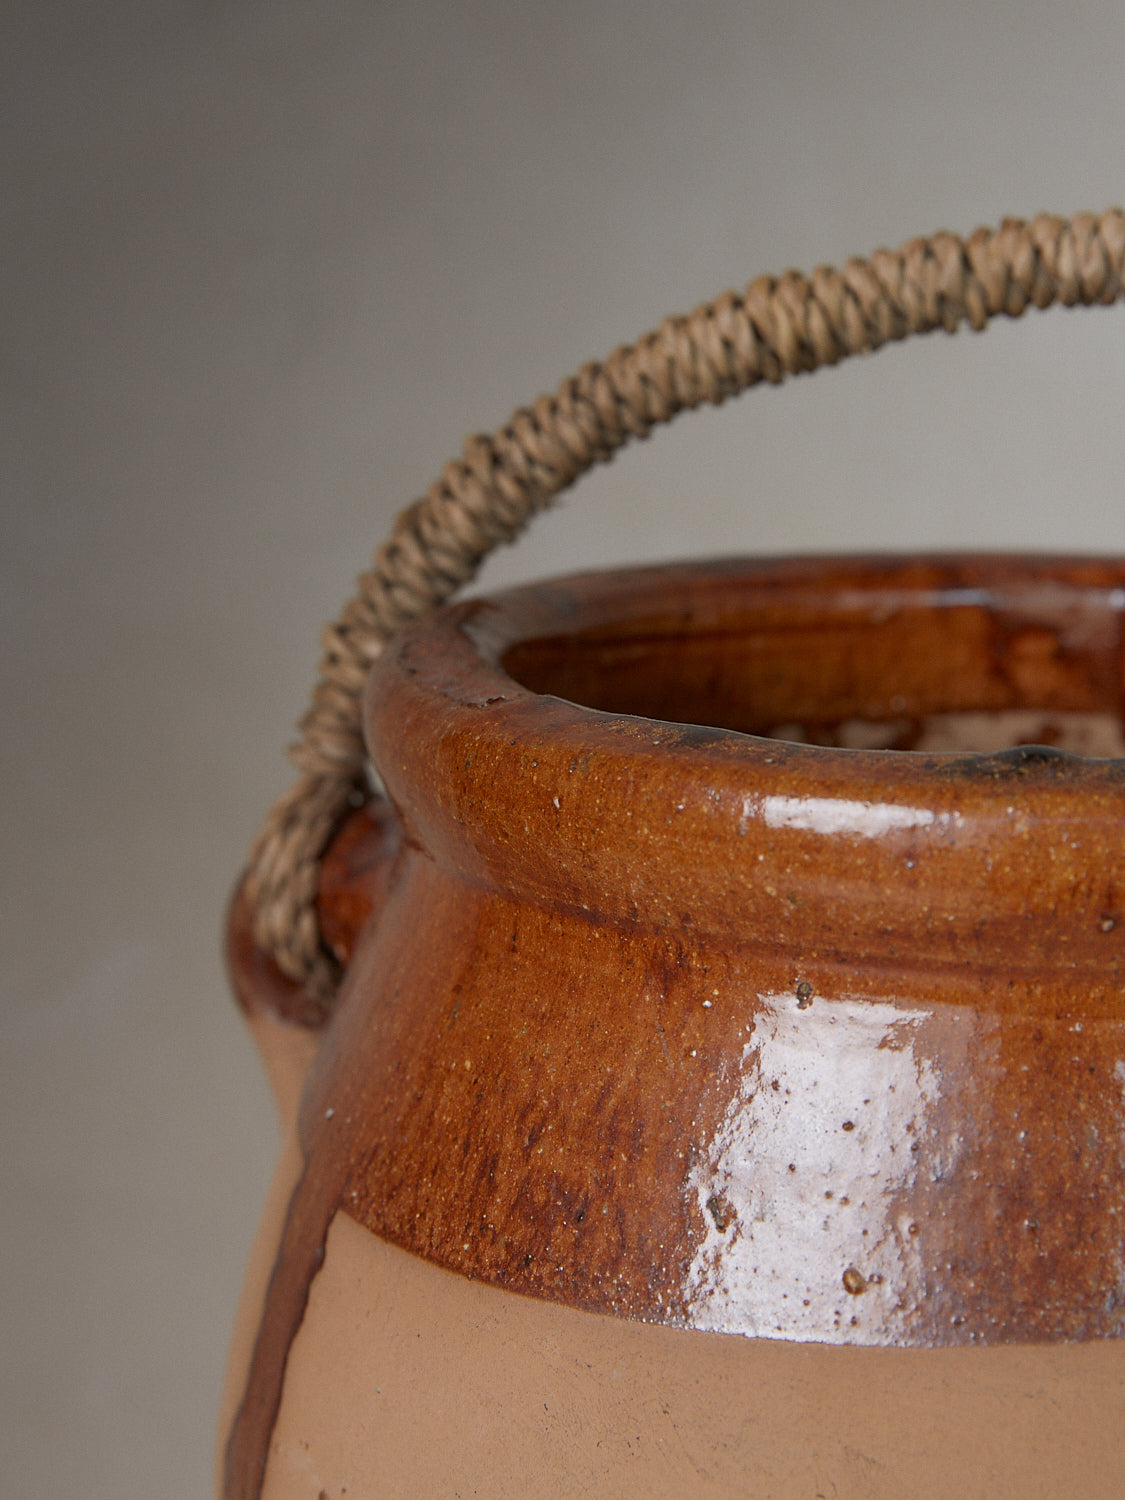 Mouraz Vessel. Rare vintage find. Tall, rustic earthenware vessel with ribbed detailing at bodice, a mixed glaze finish, high side handles and woven raffia top handle.